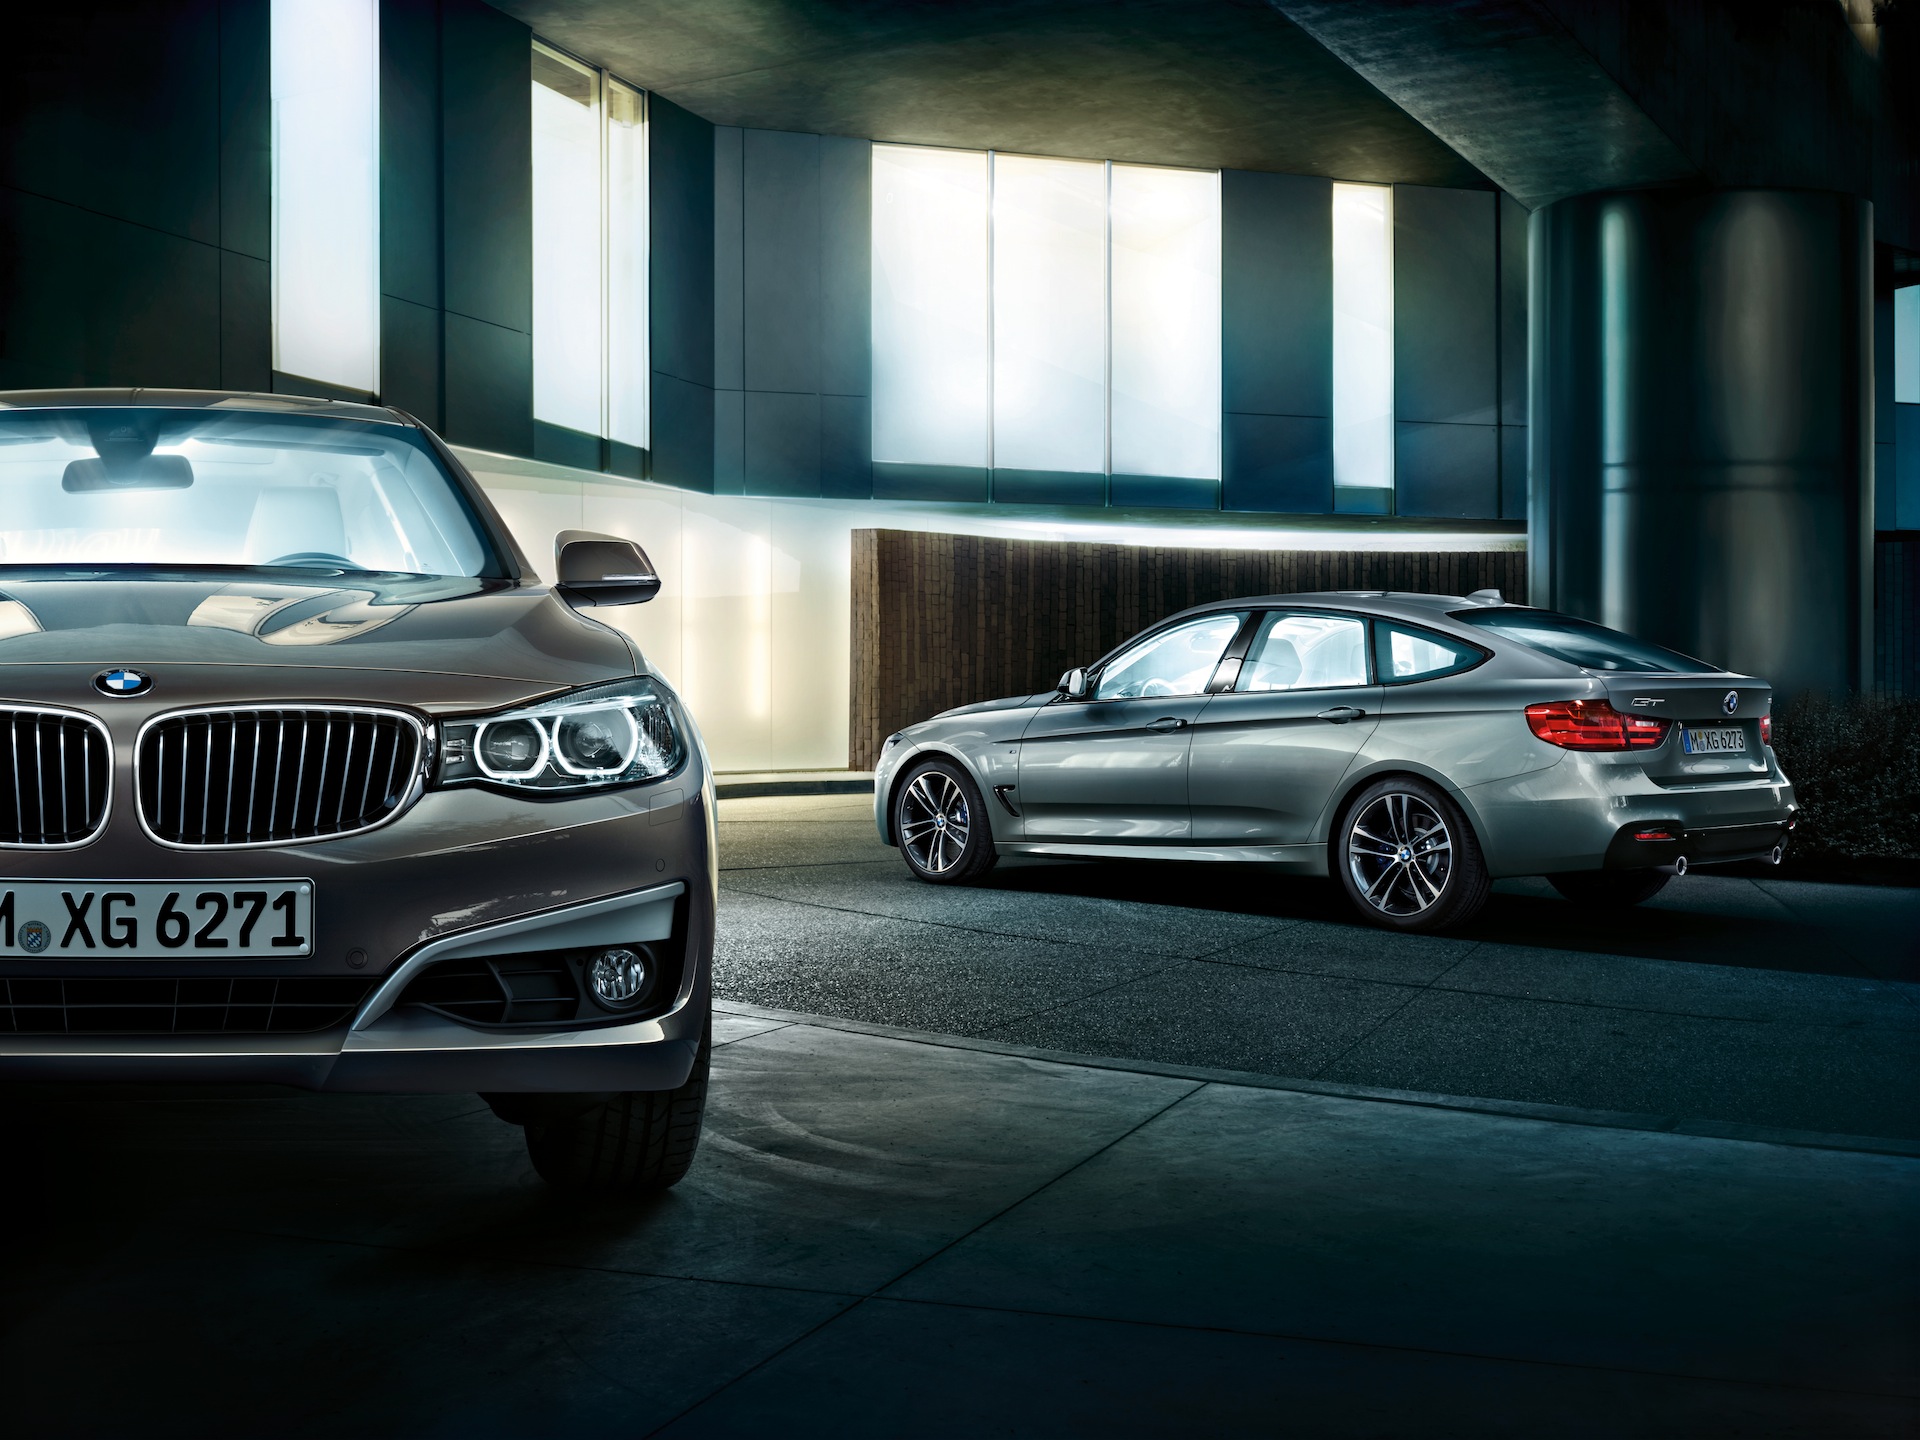 Are Some High Res Wallpaper Of The New Bmw Series Gran Turismo